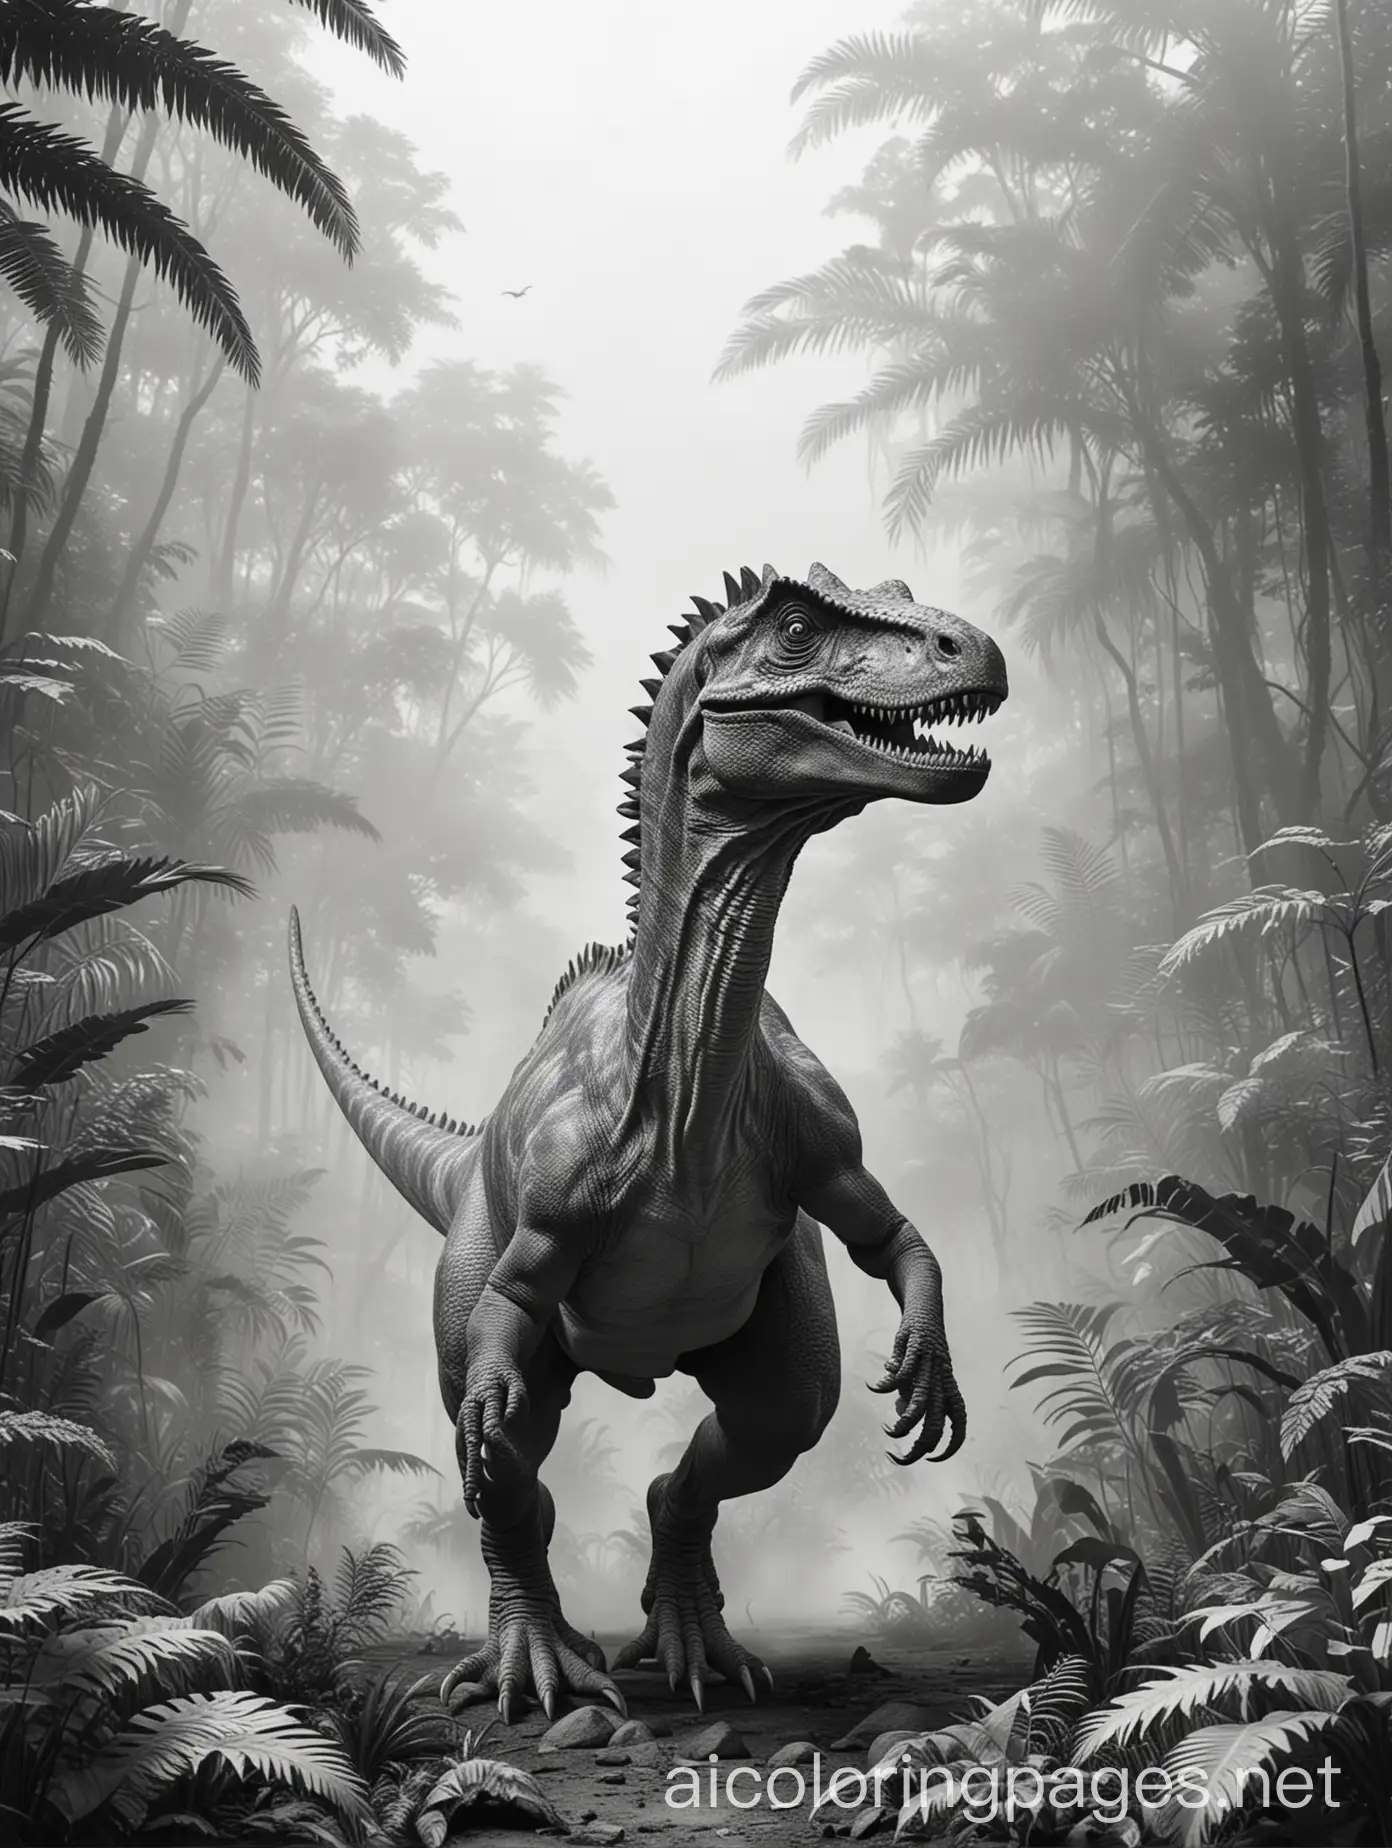 a realistic dinosaur in jungle, full haze and smoke around, Coloring Page, black and white, line art, white background, Simplicity, Ample White Space. The background of the coloring page is plain white to make it easy for young children to color within the lines. The outlines of all the subjects are easy to distinguish, making it simple for kids to color without too much difficulty